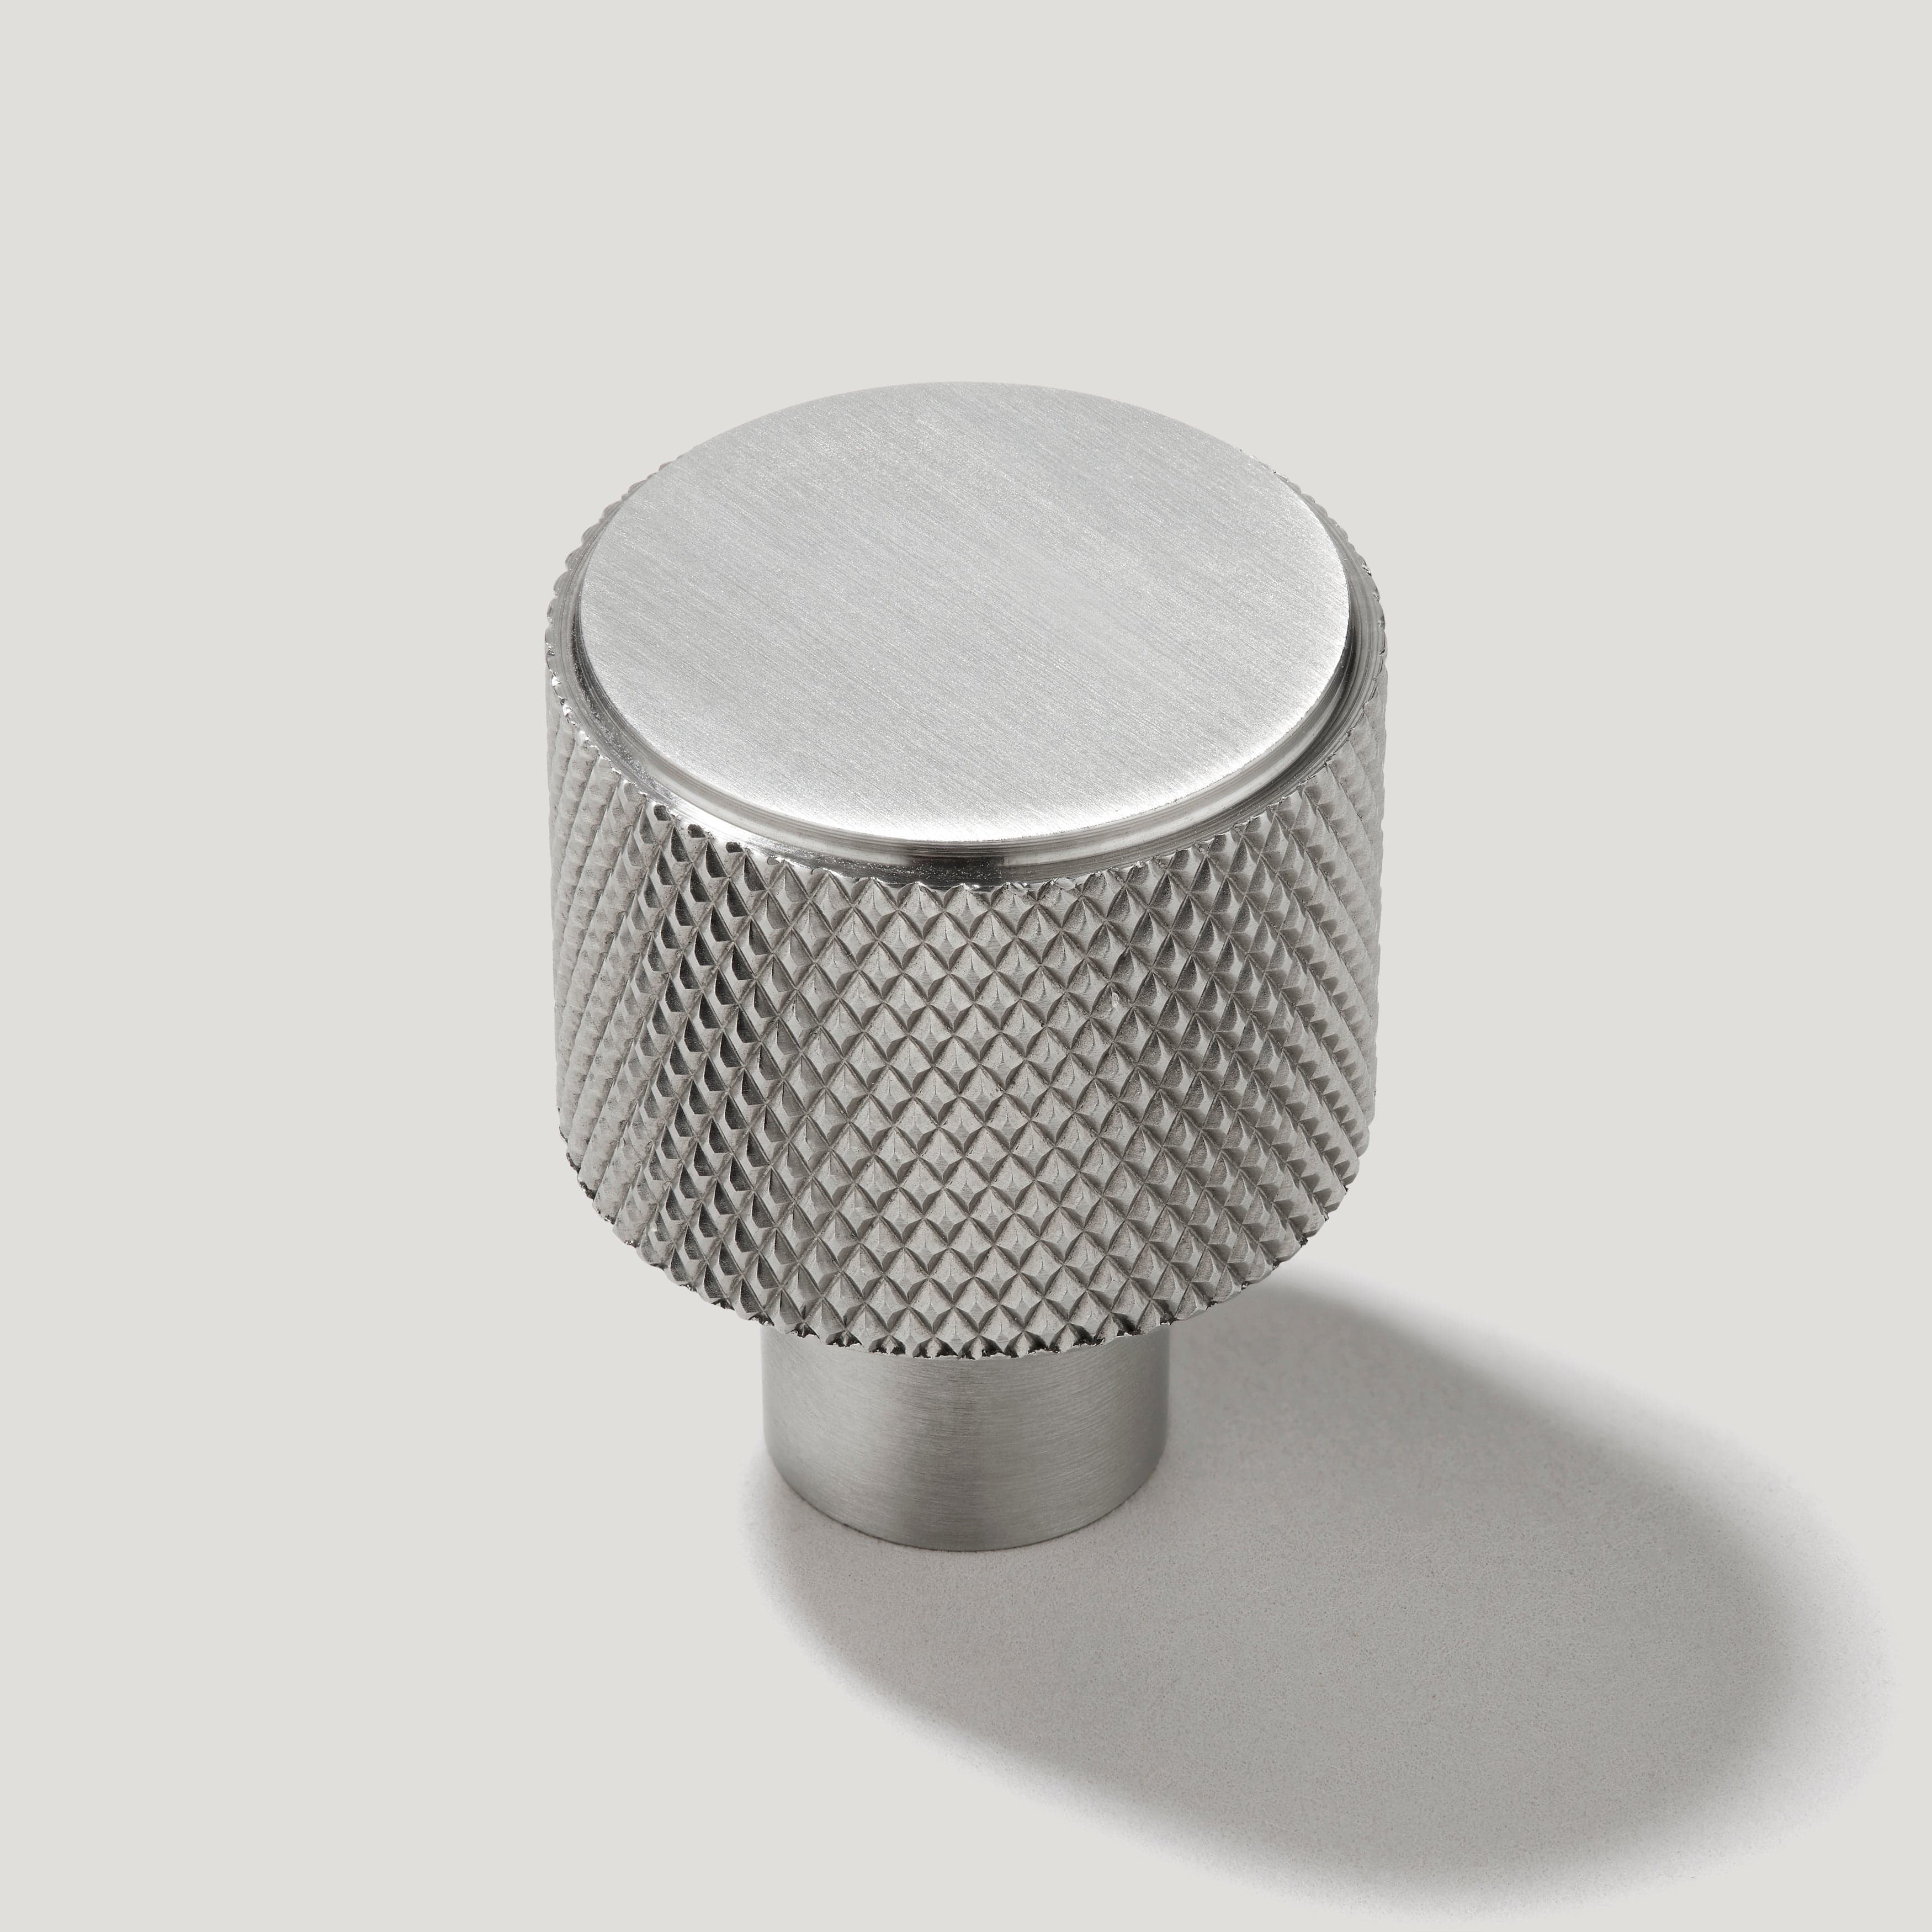 Plank Hardware REVILL Knurled Button Cabinet Knob - Stainless Steel